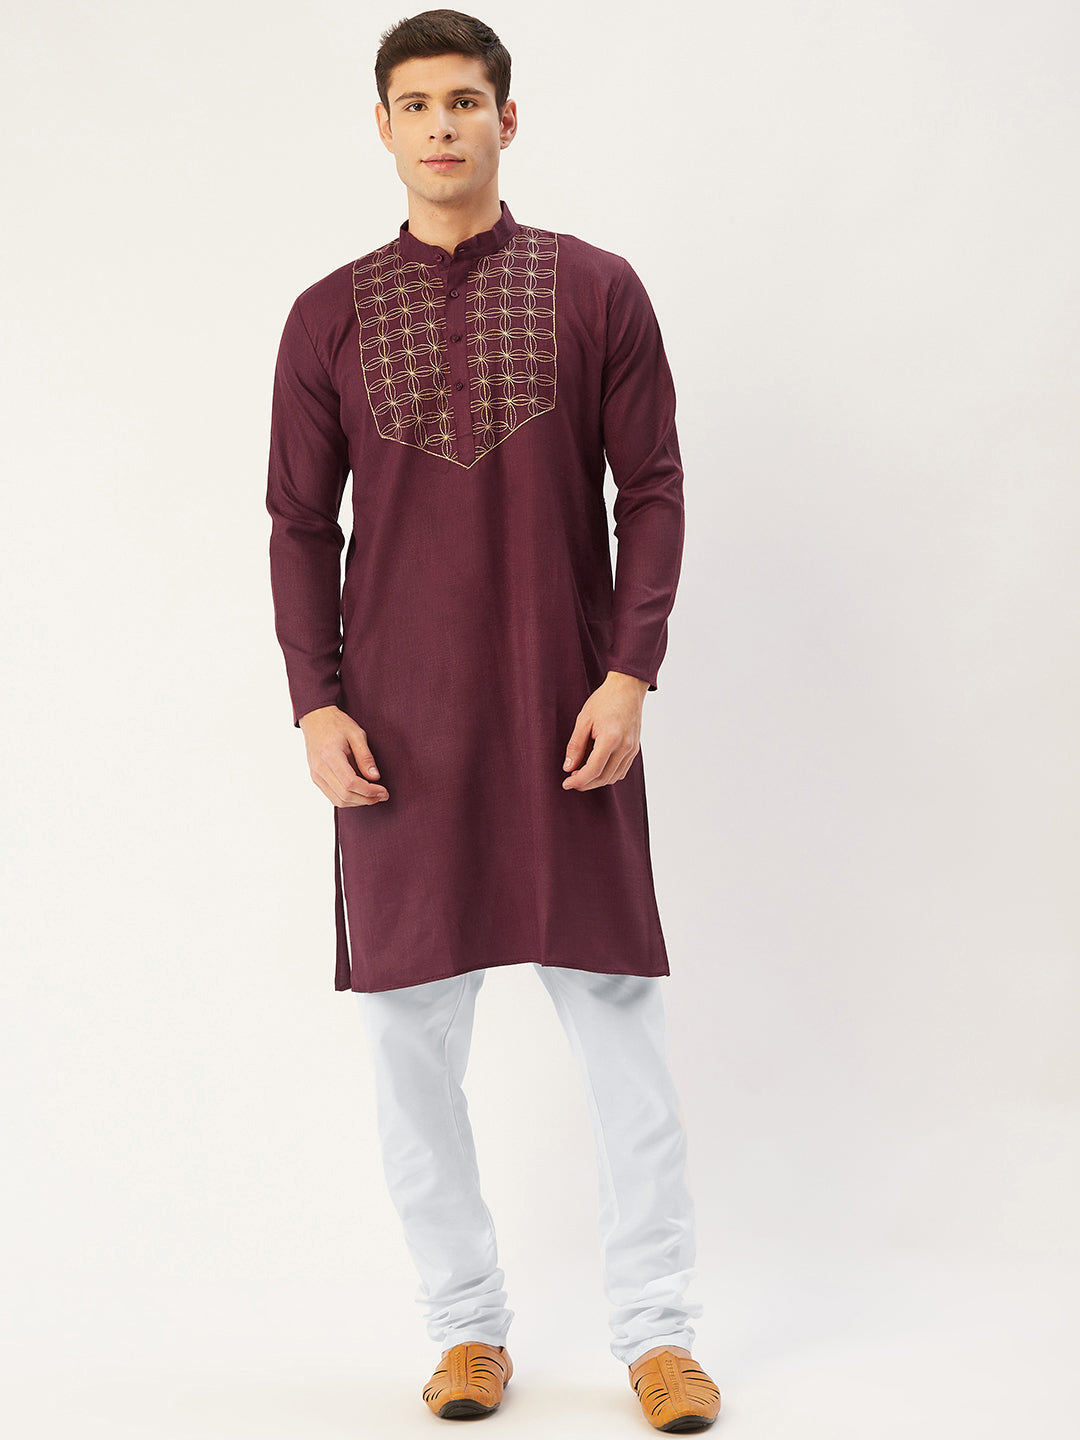 Jompers Men's Maroon Cotton Embroidered Kurta Only